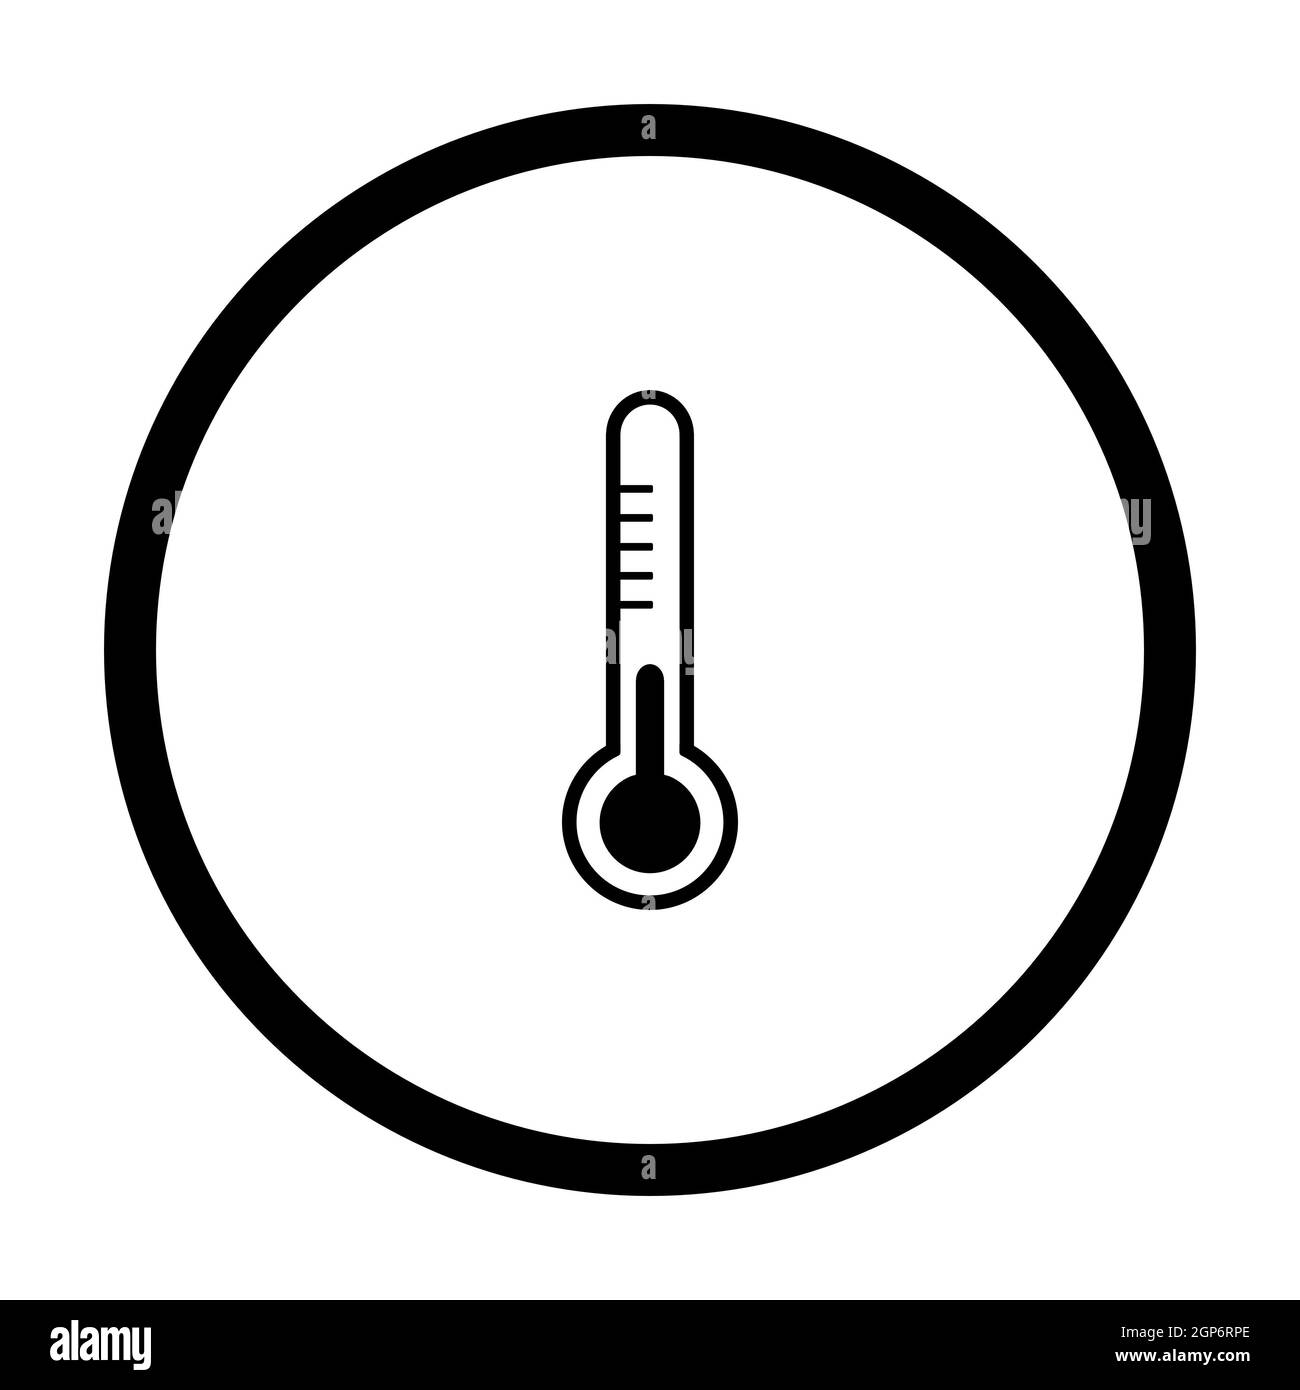 Thermometer and circle Stock Photo